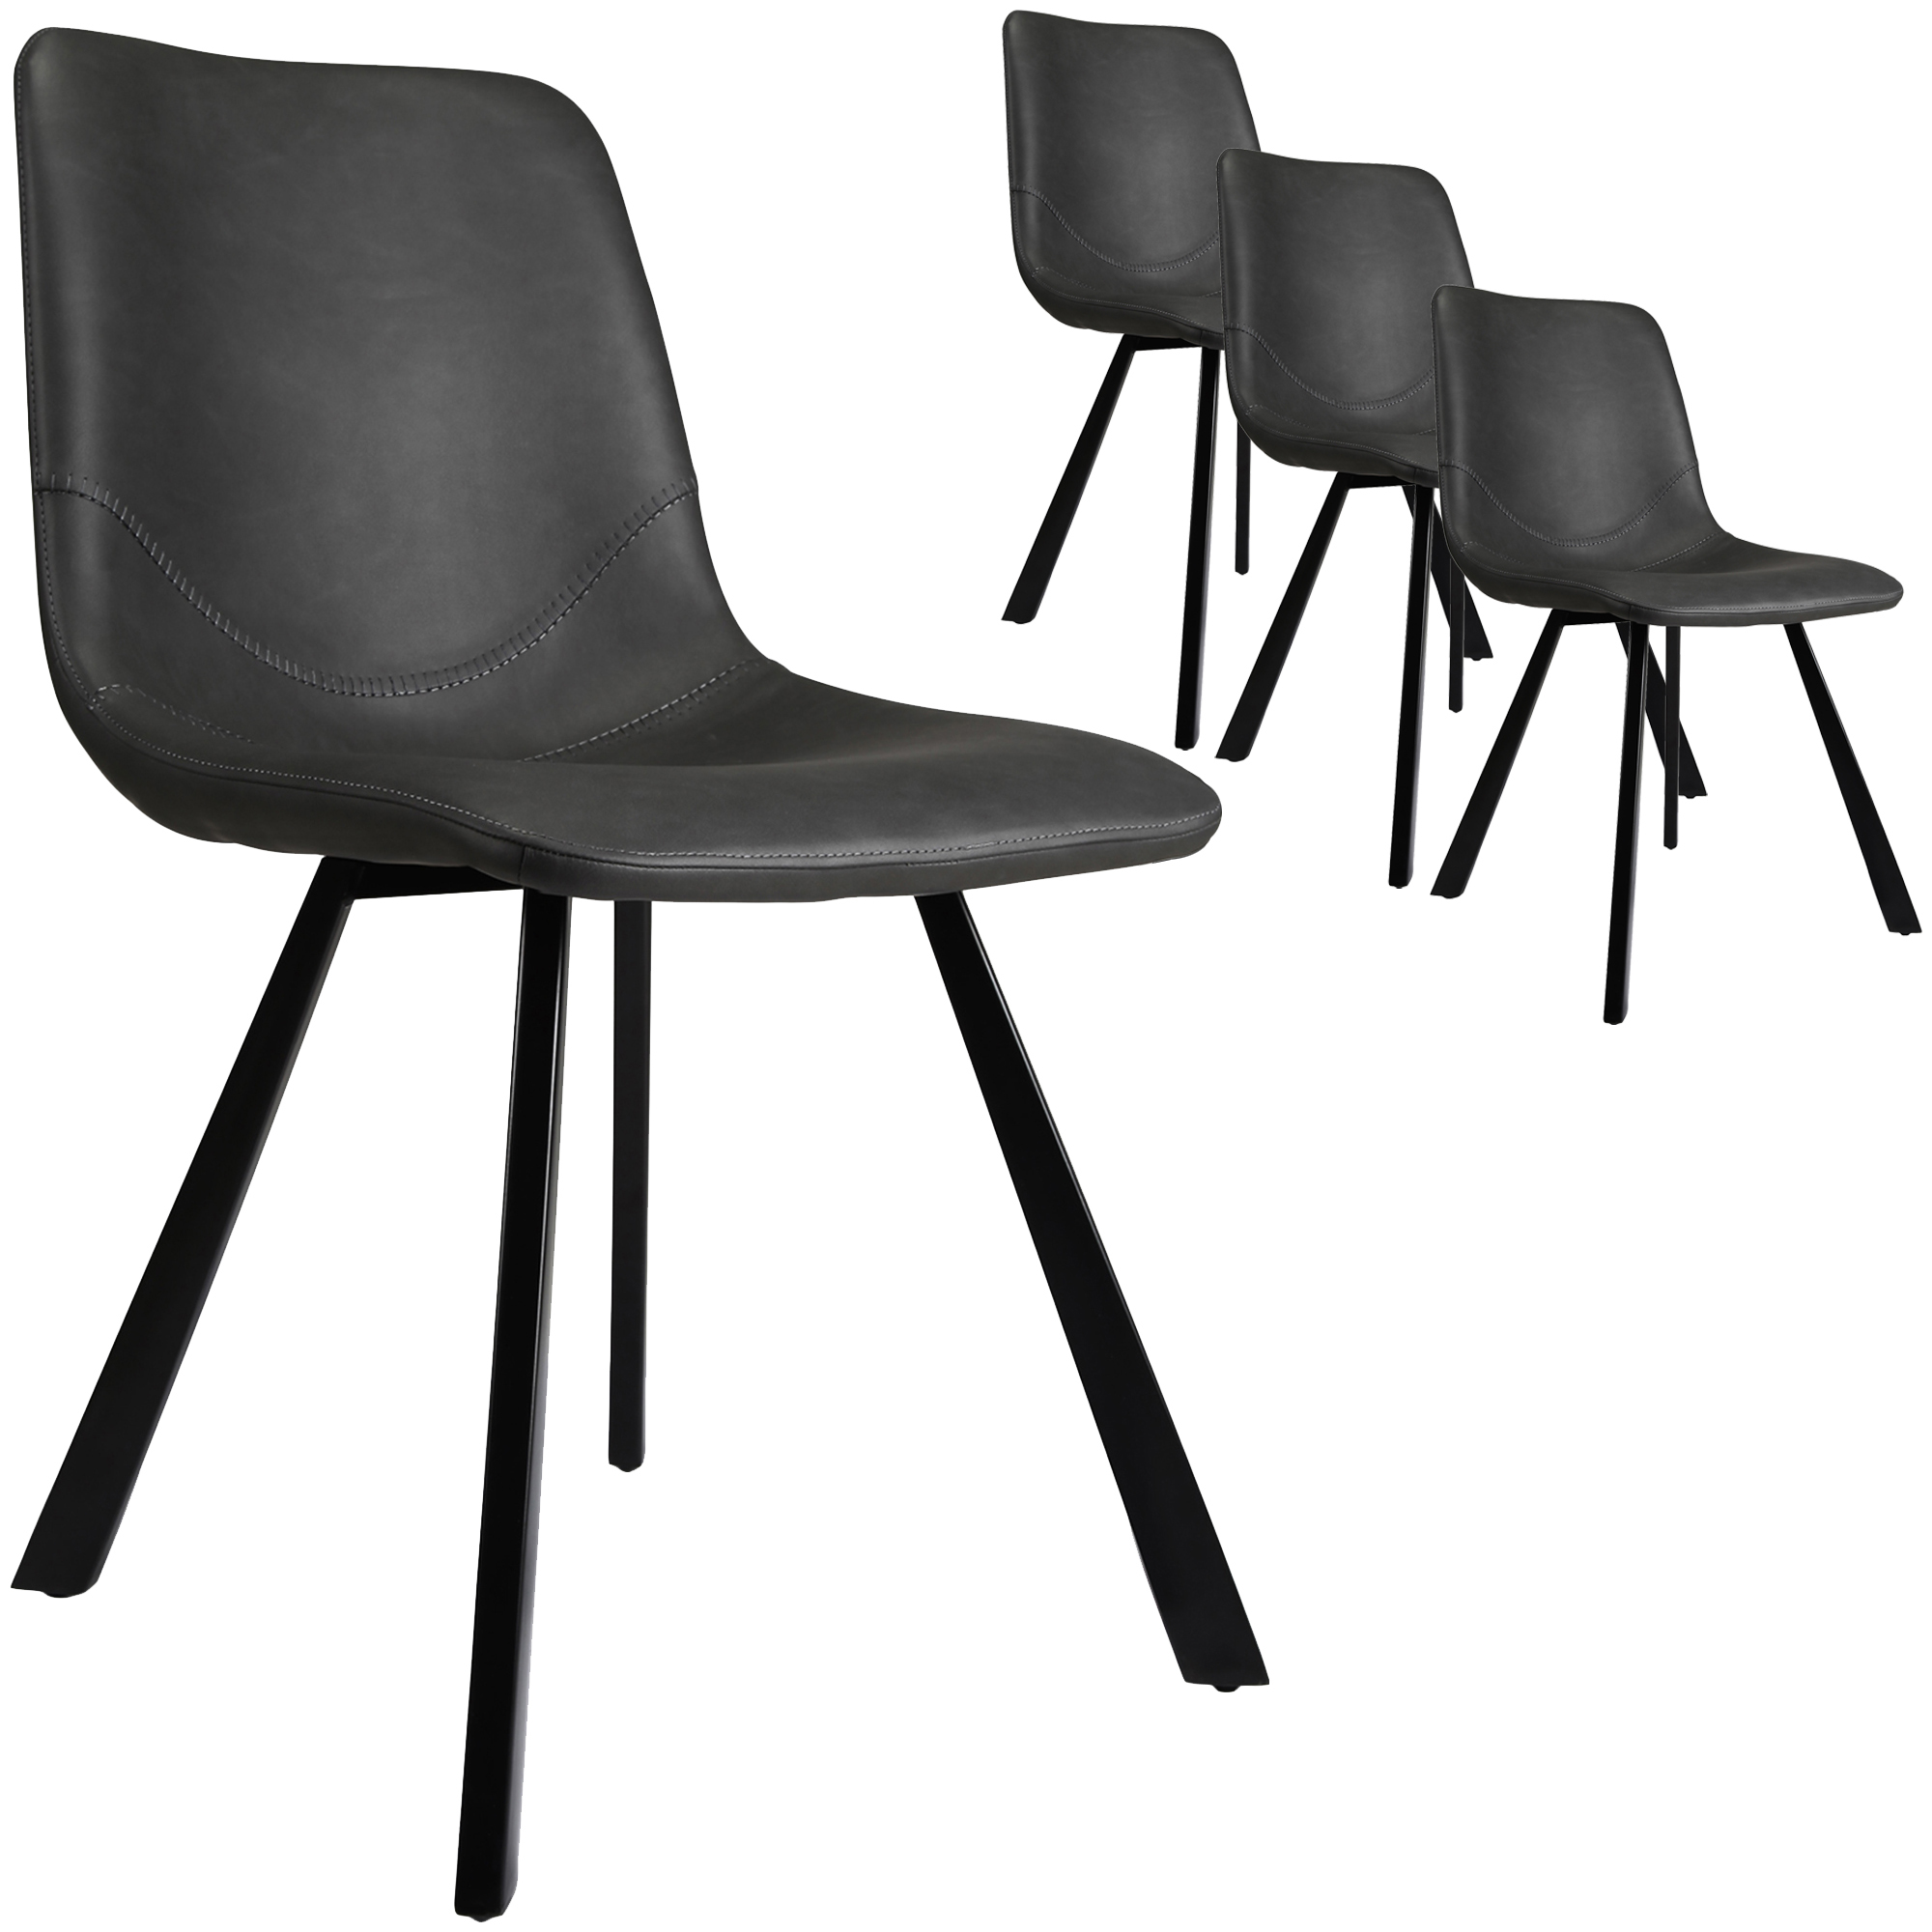 Keys Road Designs Sandra Faux Leather, Black Faux Leather Dining Chairs Set Of 4